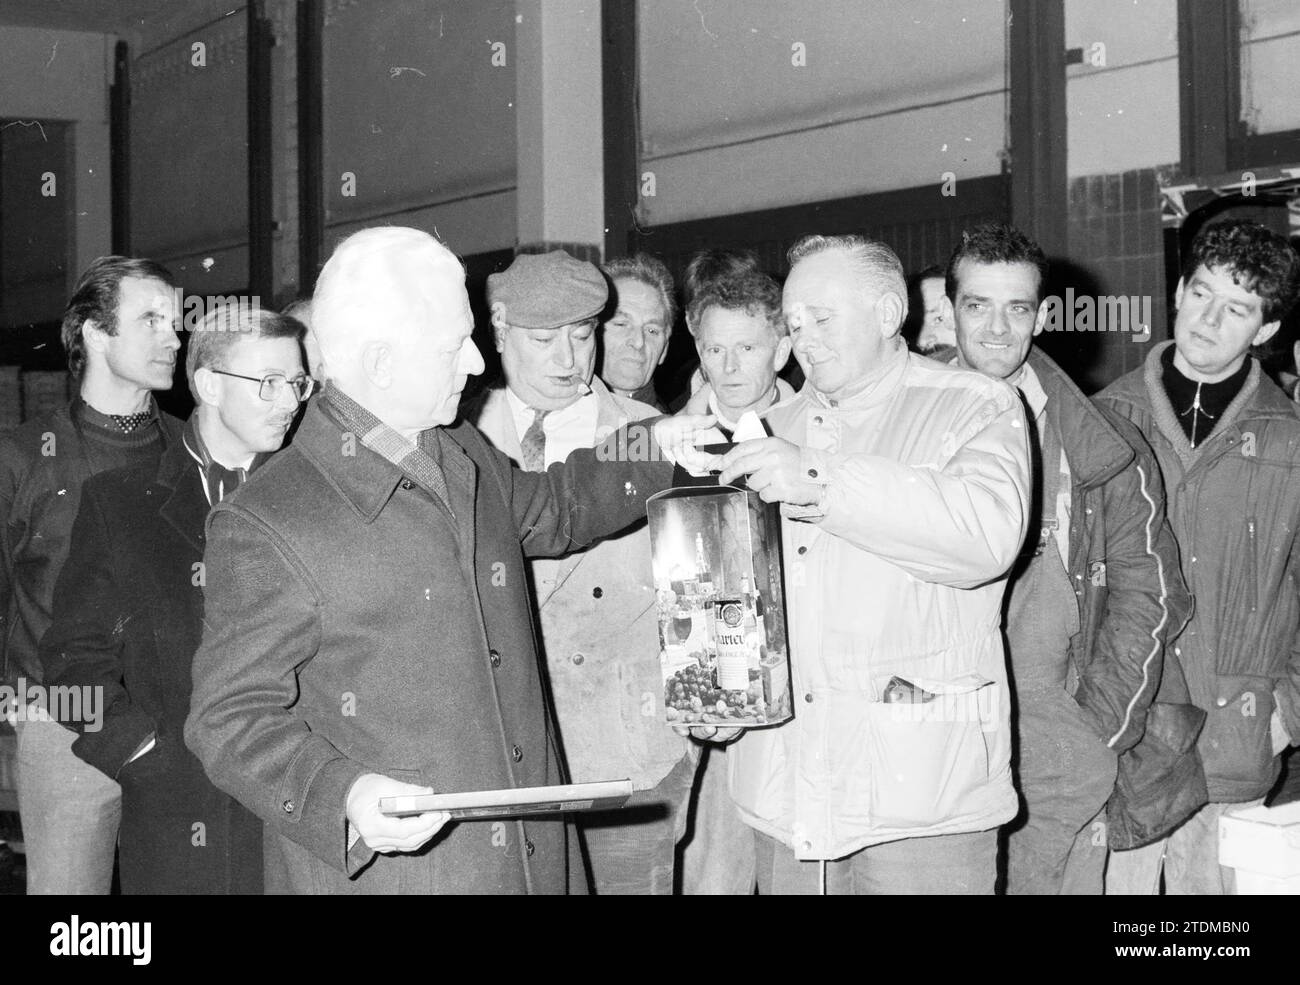 Exchange of gifts between two men, Whizgle News from the Past, Tailored for the Future. Explore historical narratives, Dutch The Netherlands agency image with a modern perspective, bridging the gap between yesterday's events and tomorrow's insights. A timeless journey shaping the stories that shape our future Stock Photo